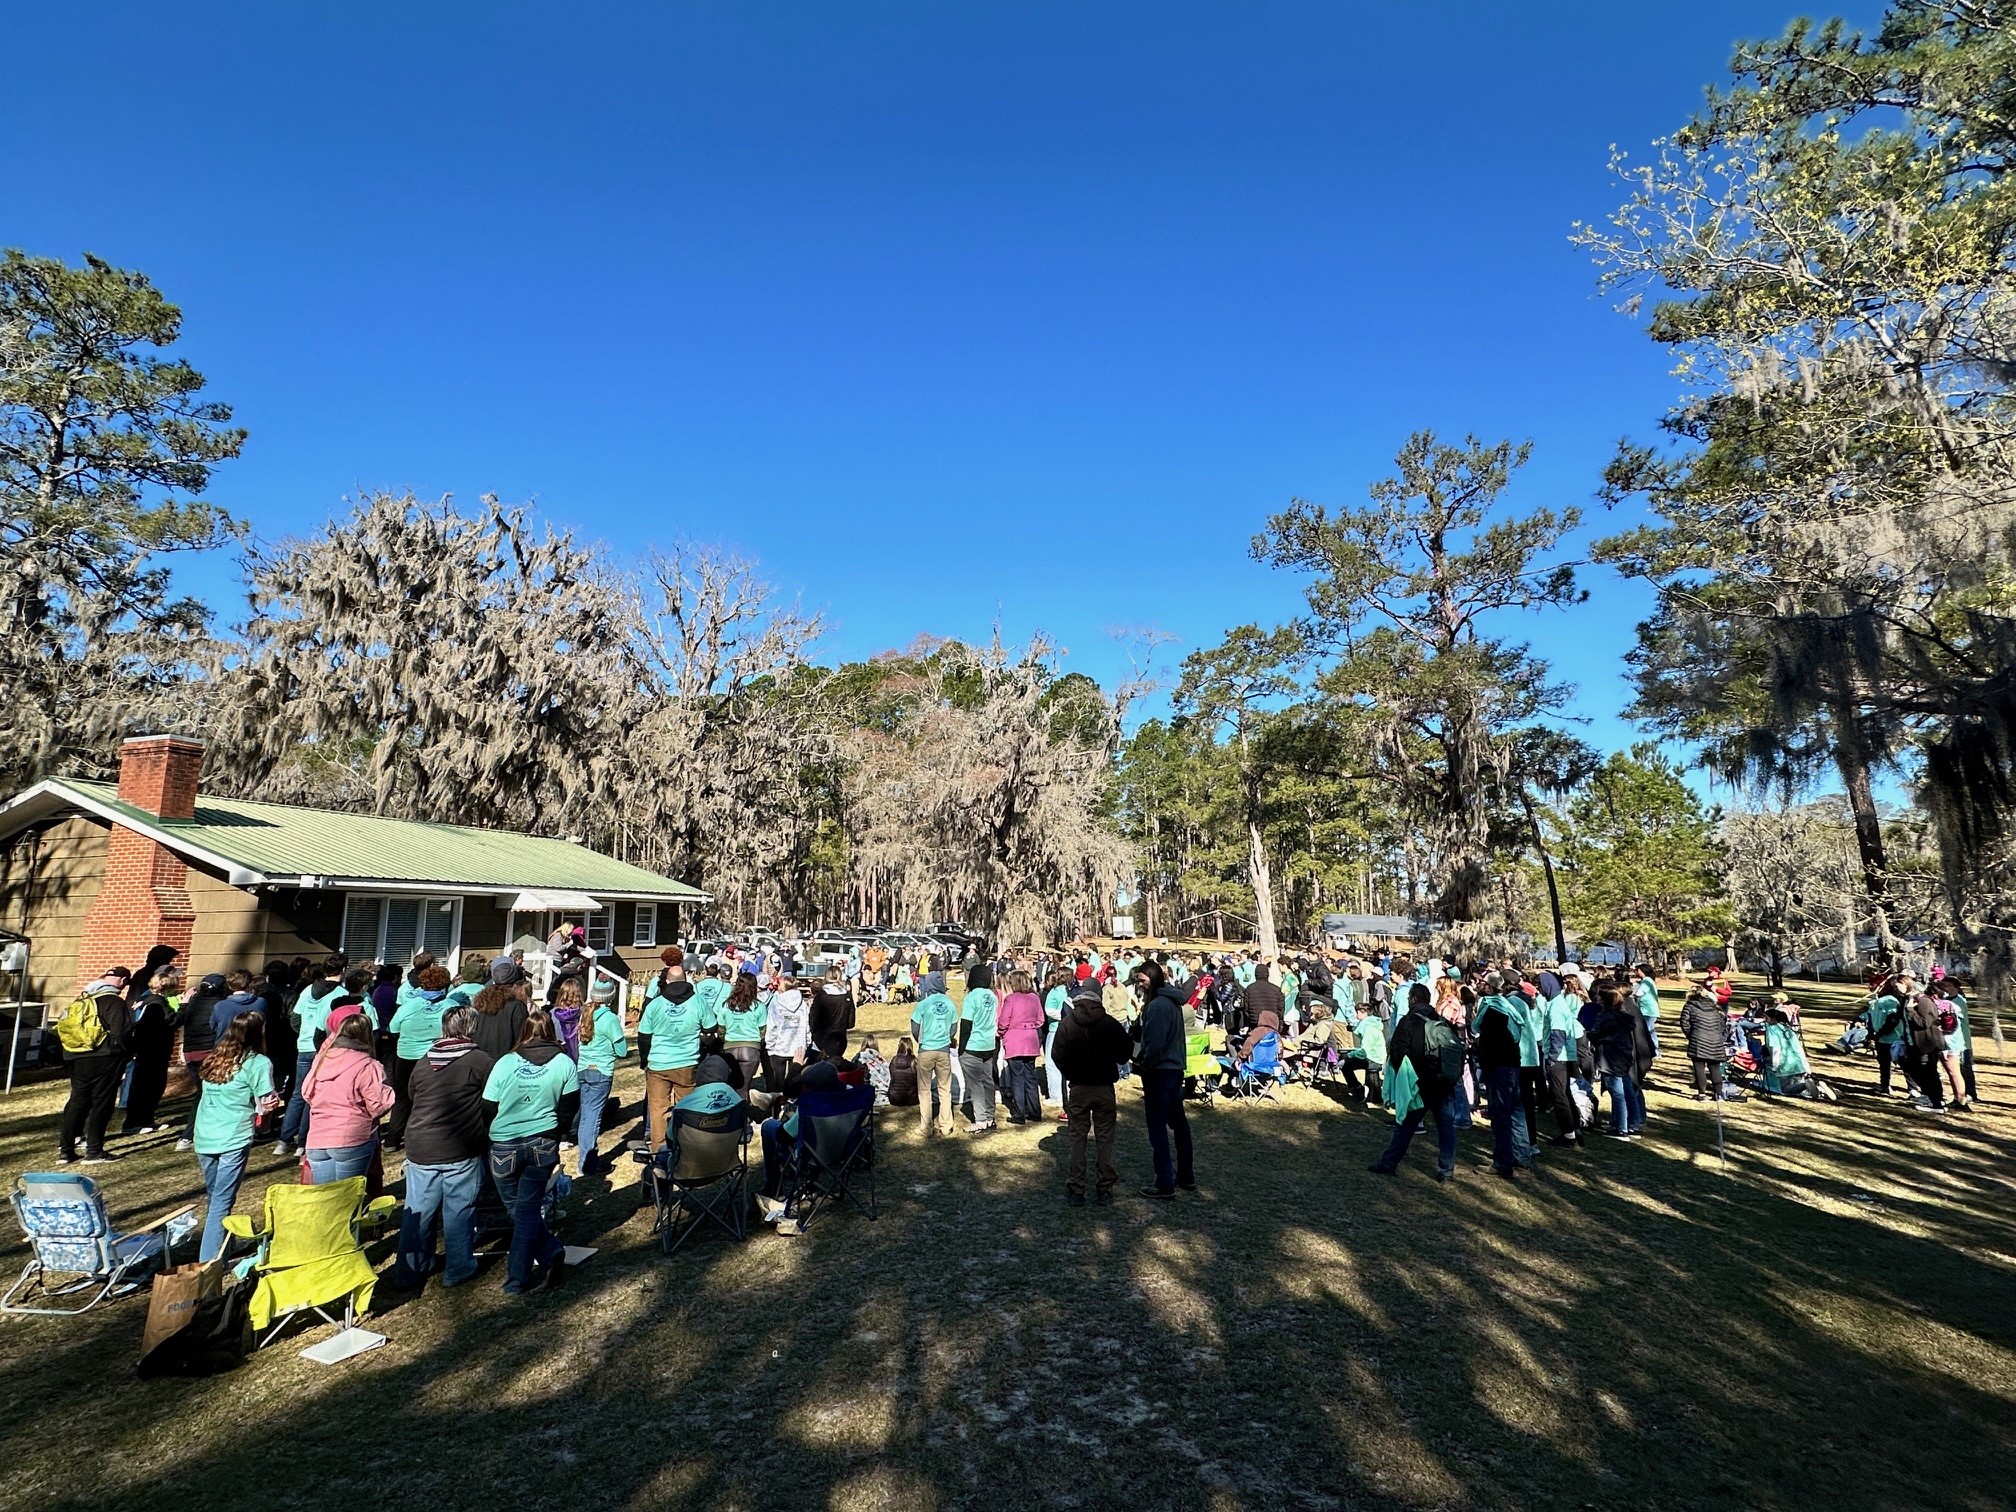 Image of the some of the nearly 500 visitors who came to Cool Springs for the 2024 Envirothon. The visitors are dressed in an array of colors and are standing in a field in front of numerous trees.